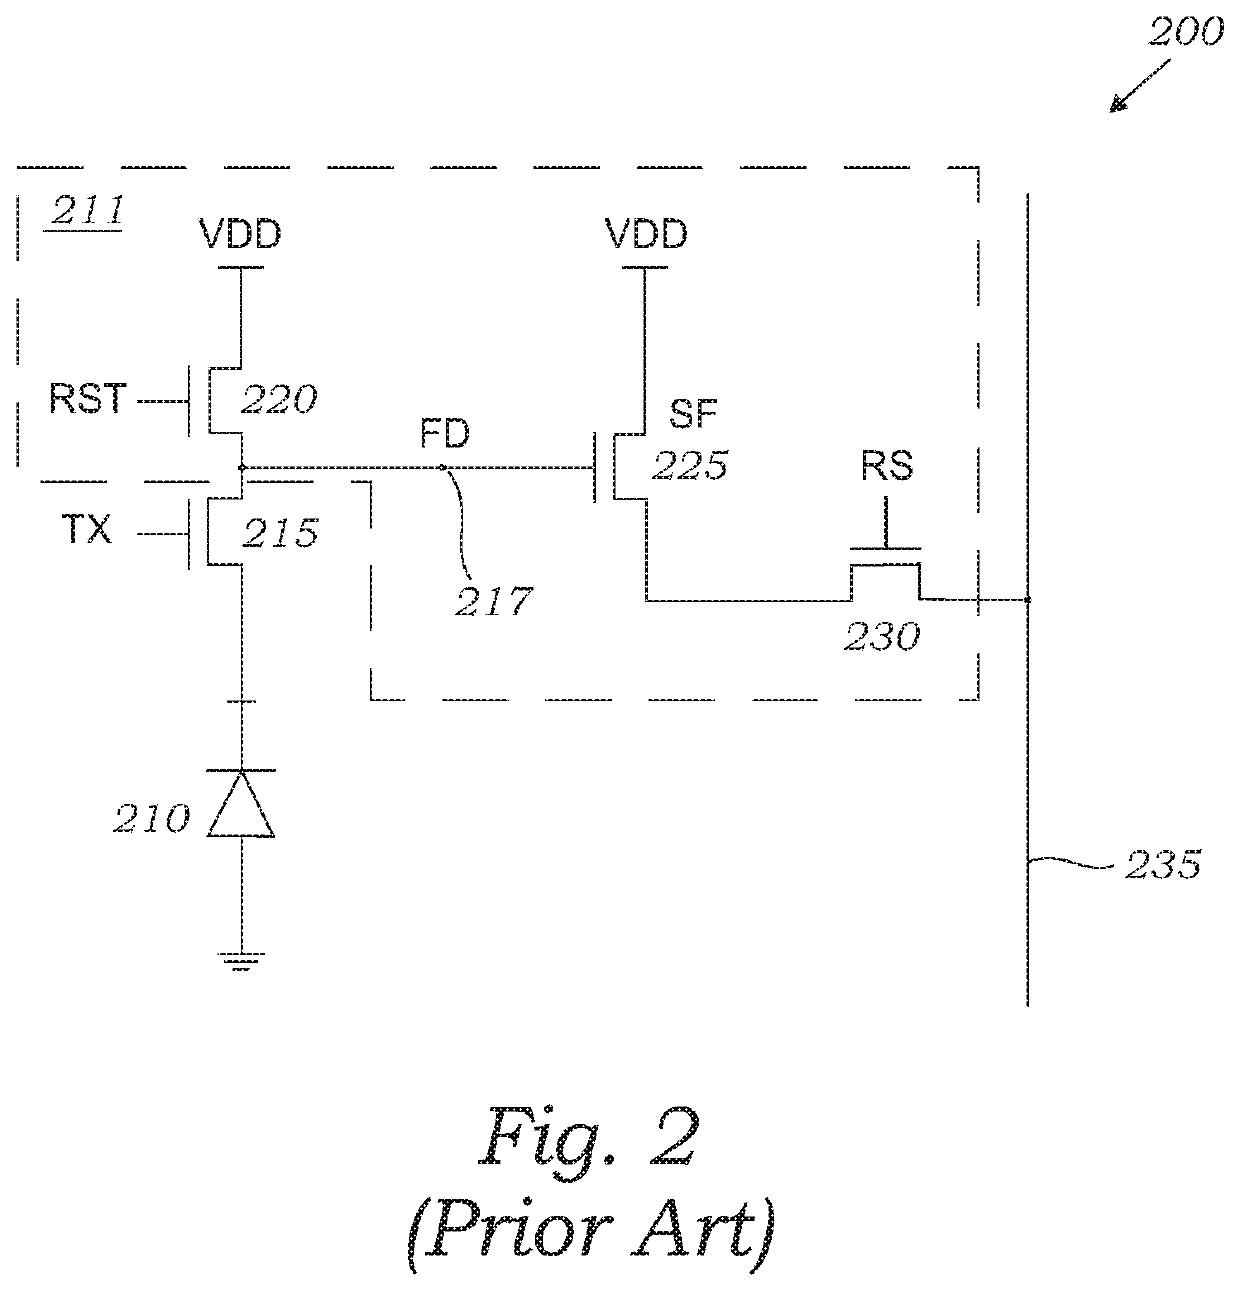 CMOS image sensor with improved column data shift readout